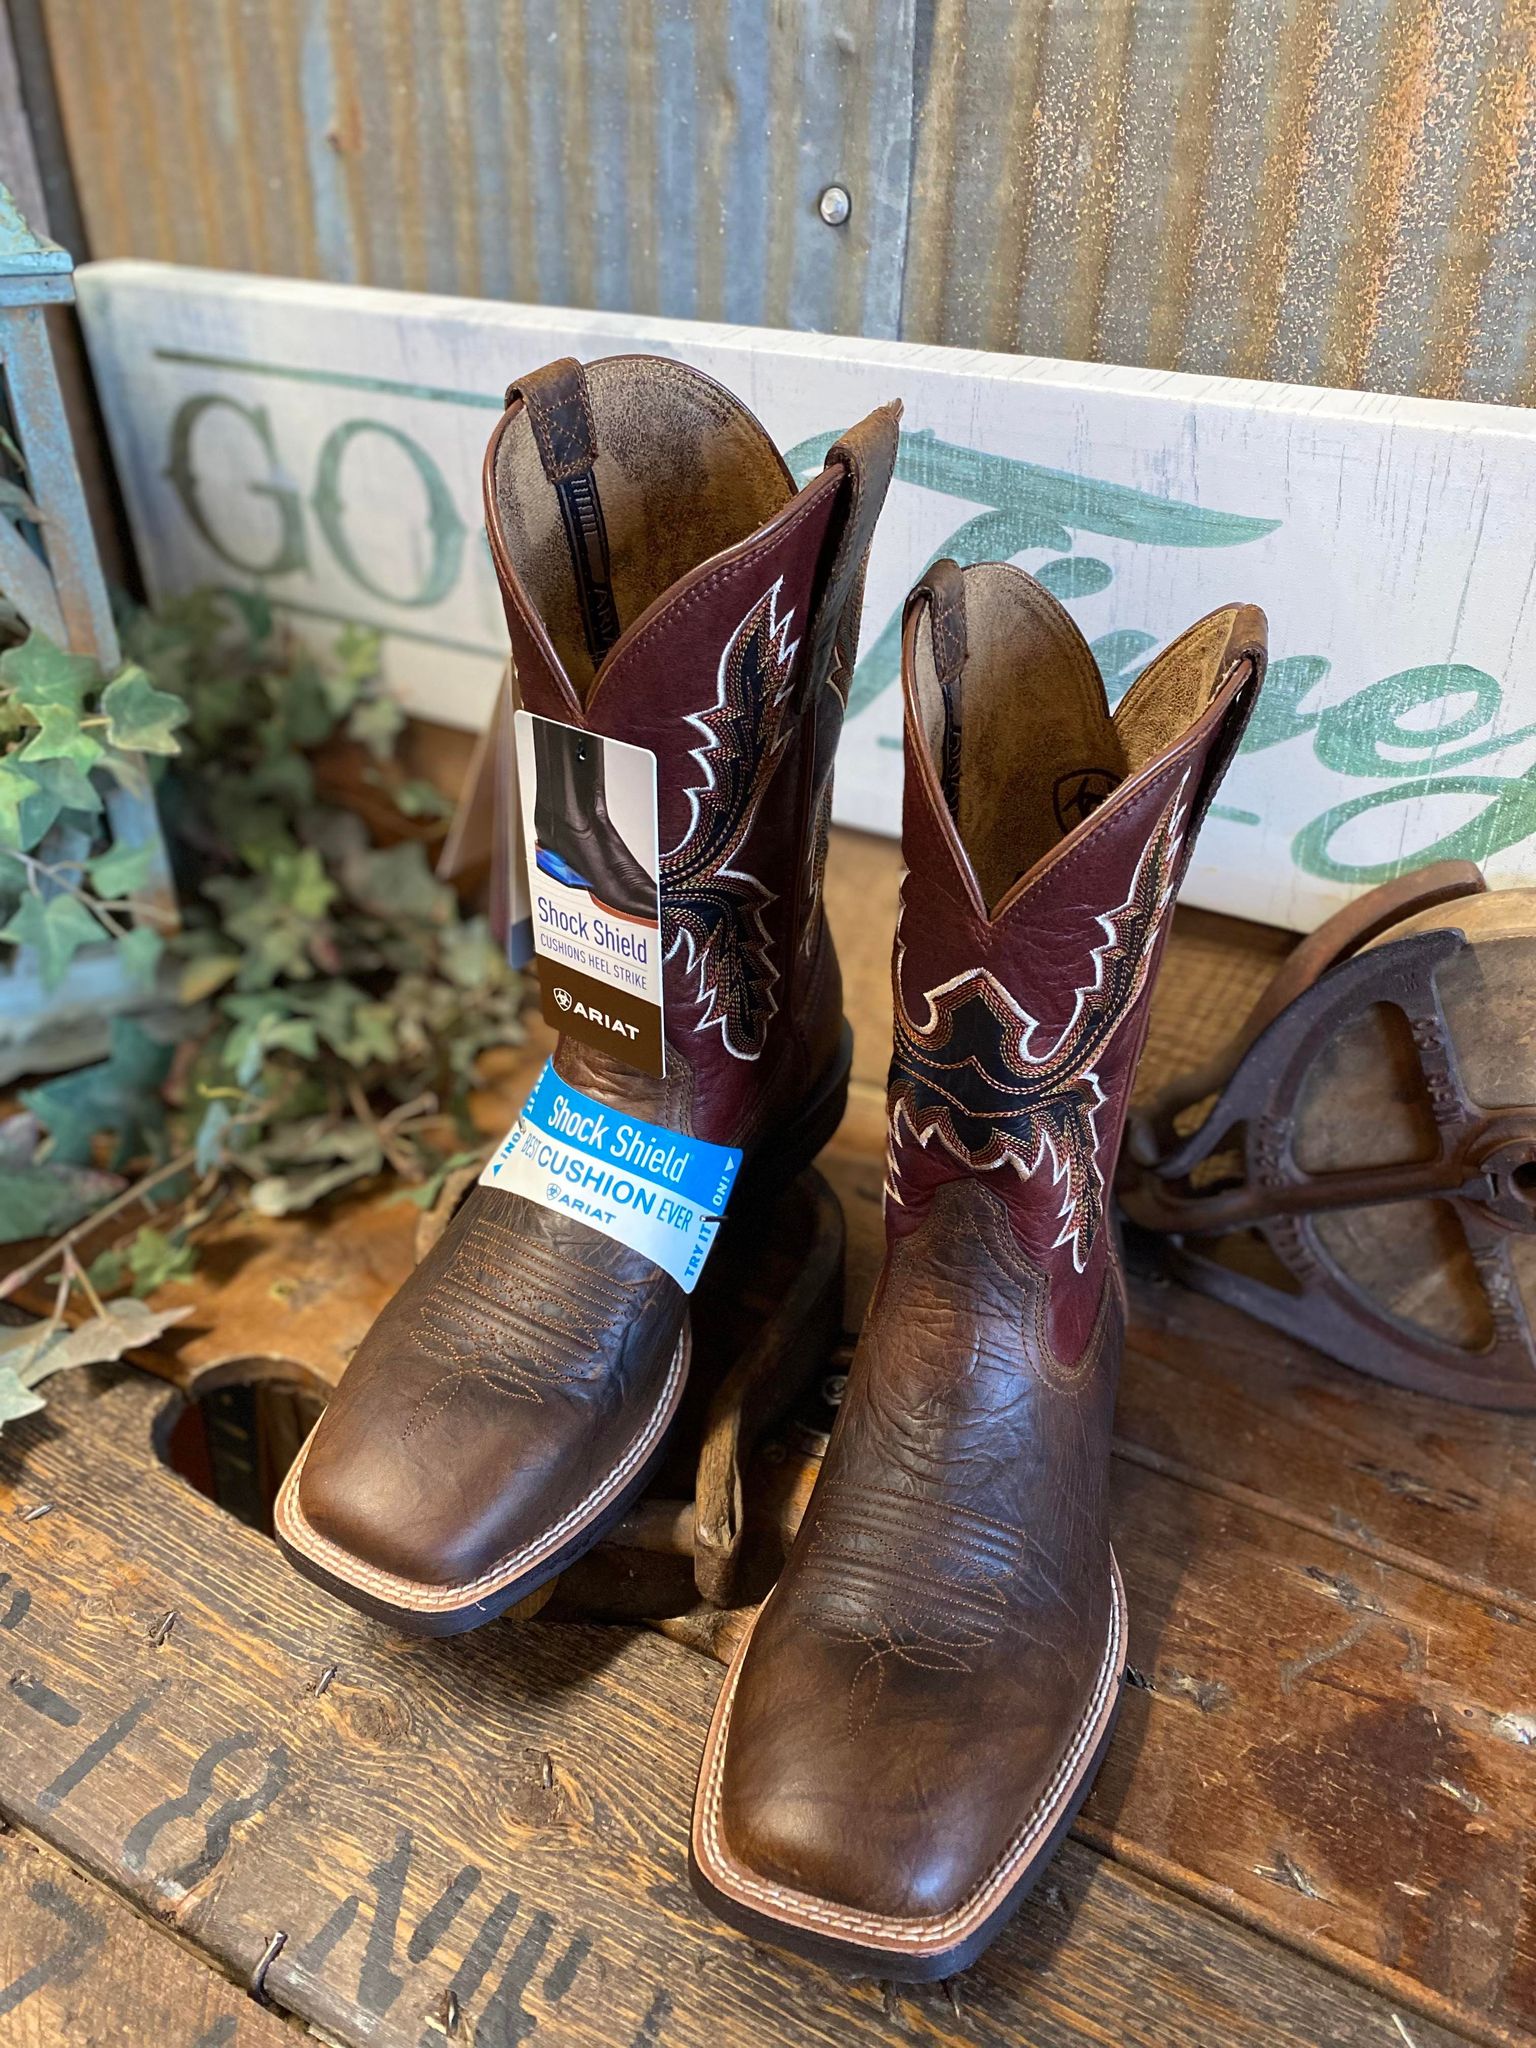 Mens Ariat Pay Window Square Toe Boot-Men's Boots-Ariat-Lucky J Boots & More, Women's, Men's, & Kids Western Store Located in Carthage, MO